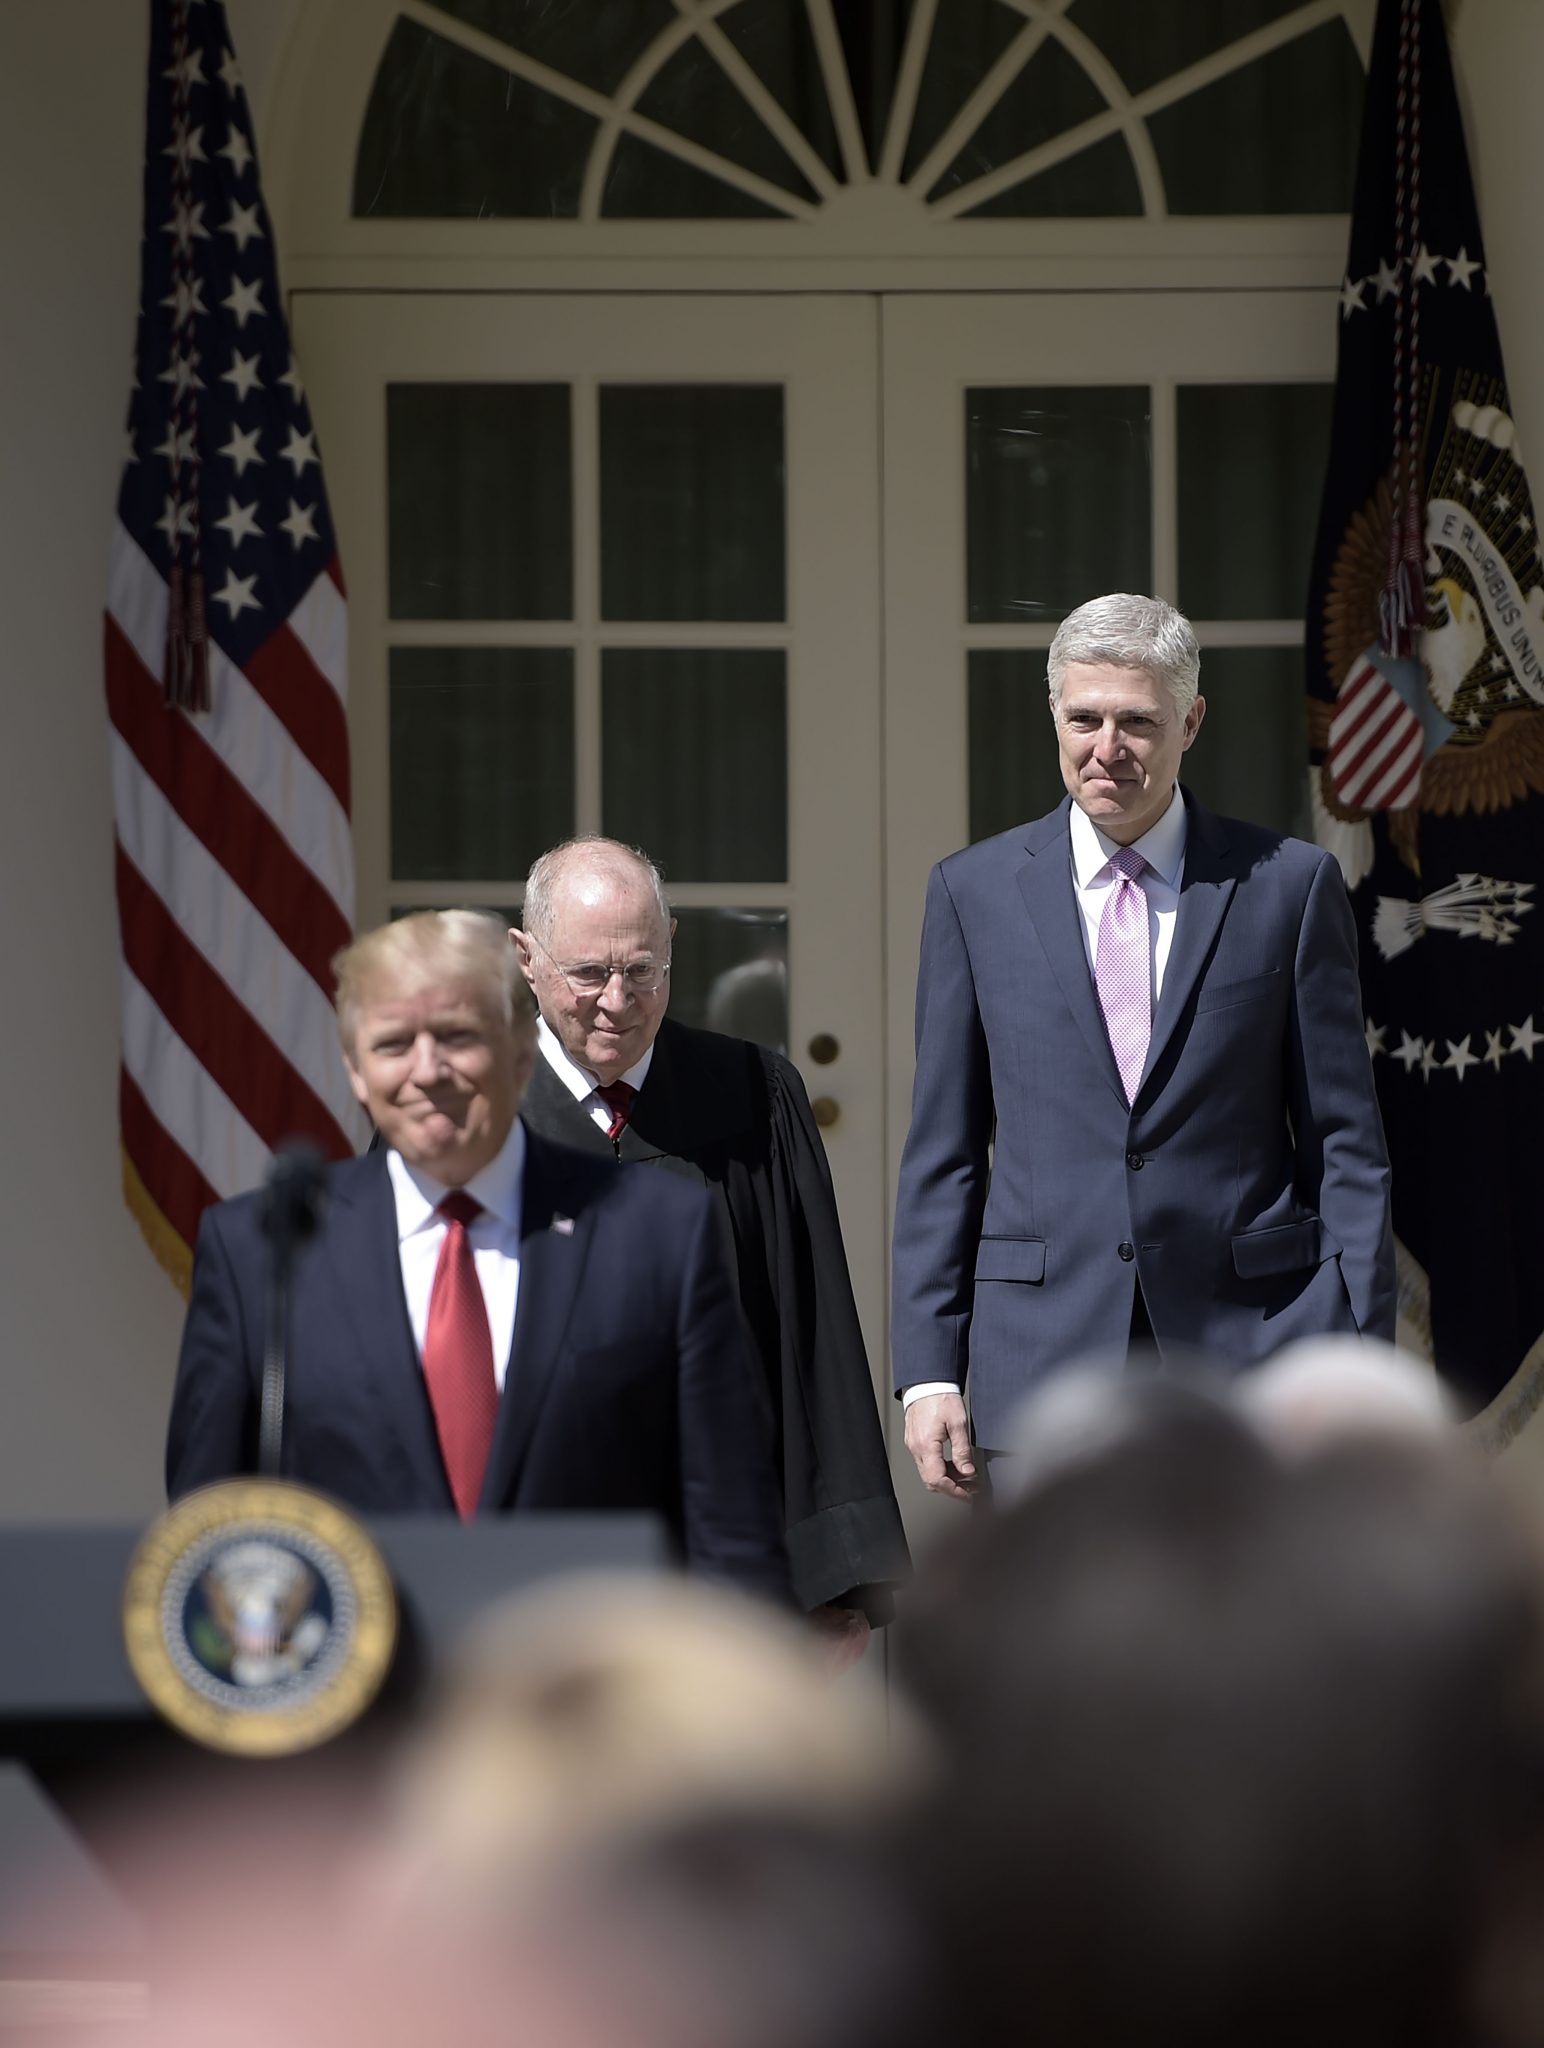 US President Donald Trump (L) arrives with Justice Anthony Kennedy (C) before Justice Kennedy administers the oath of office to Neil Gorsuch (R)as an associate justice of the US Supreme Court in the Rose Garden of the White House on April 10, 2017 in Washington, DC.   / AFP PHOTO / Brendan SMIALOWSKI